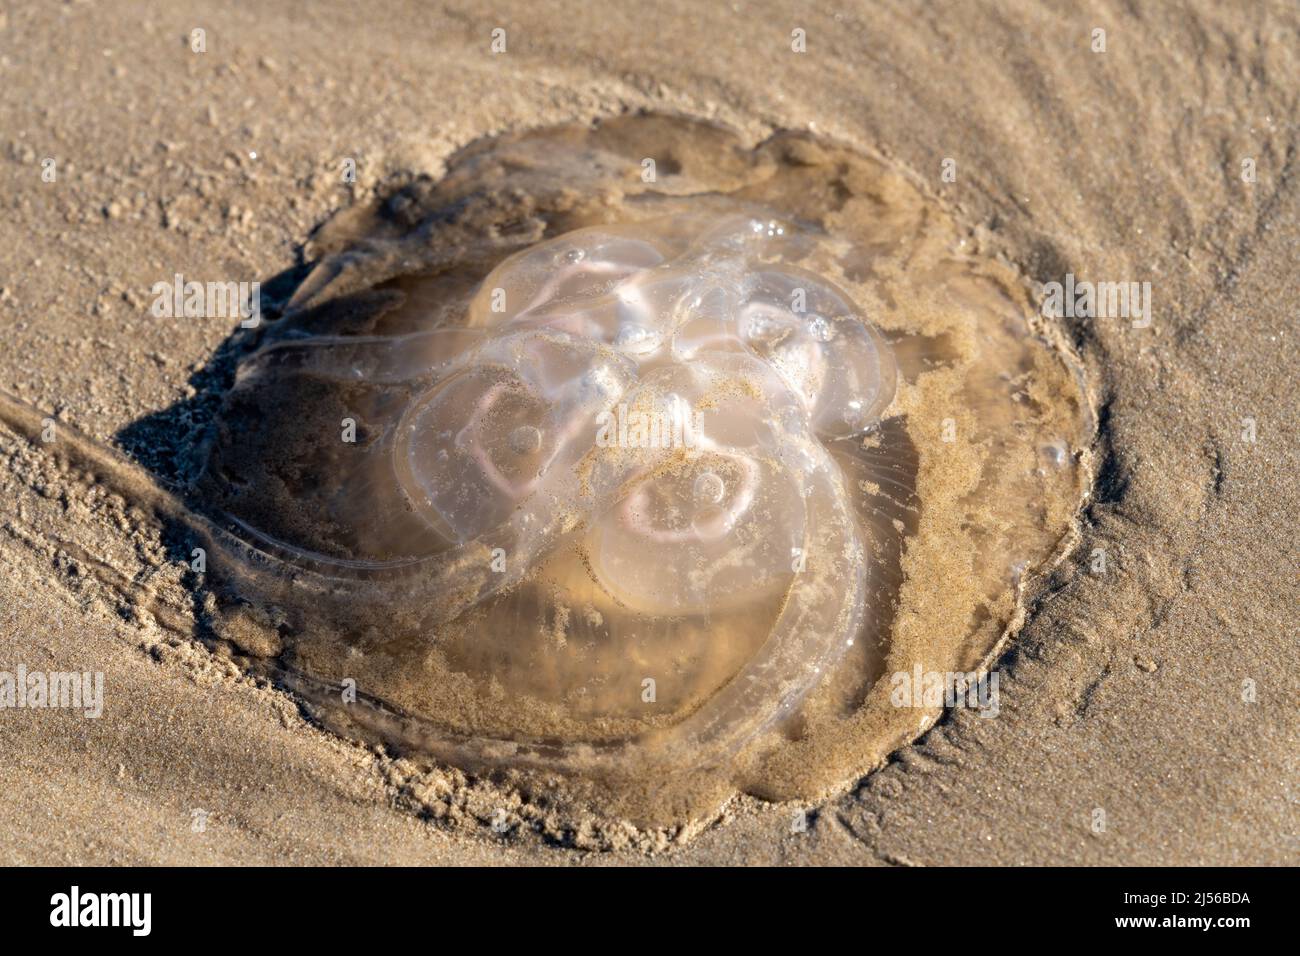 A Moon Jellyfish, Aurelia aurita. washed up on the beach at South Padre Island, Texas. Stock Photo